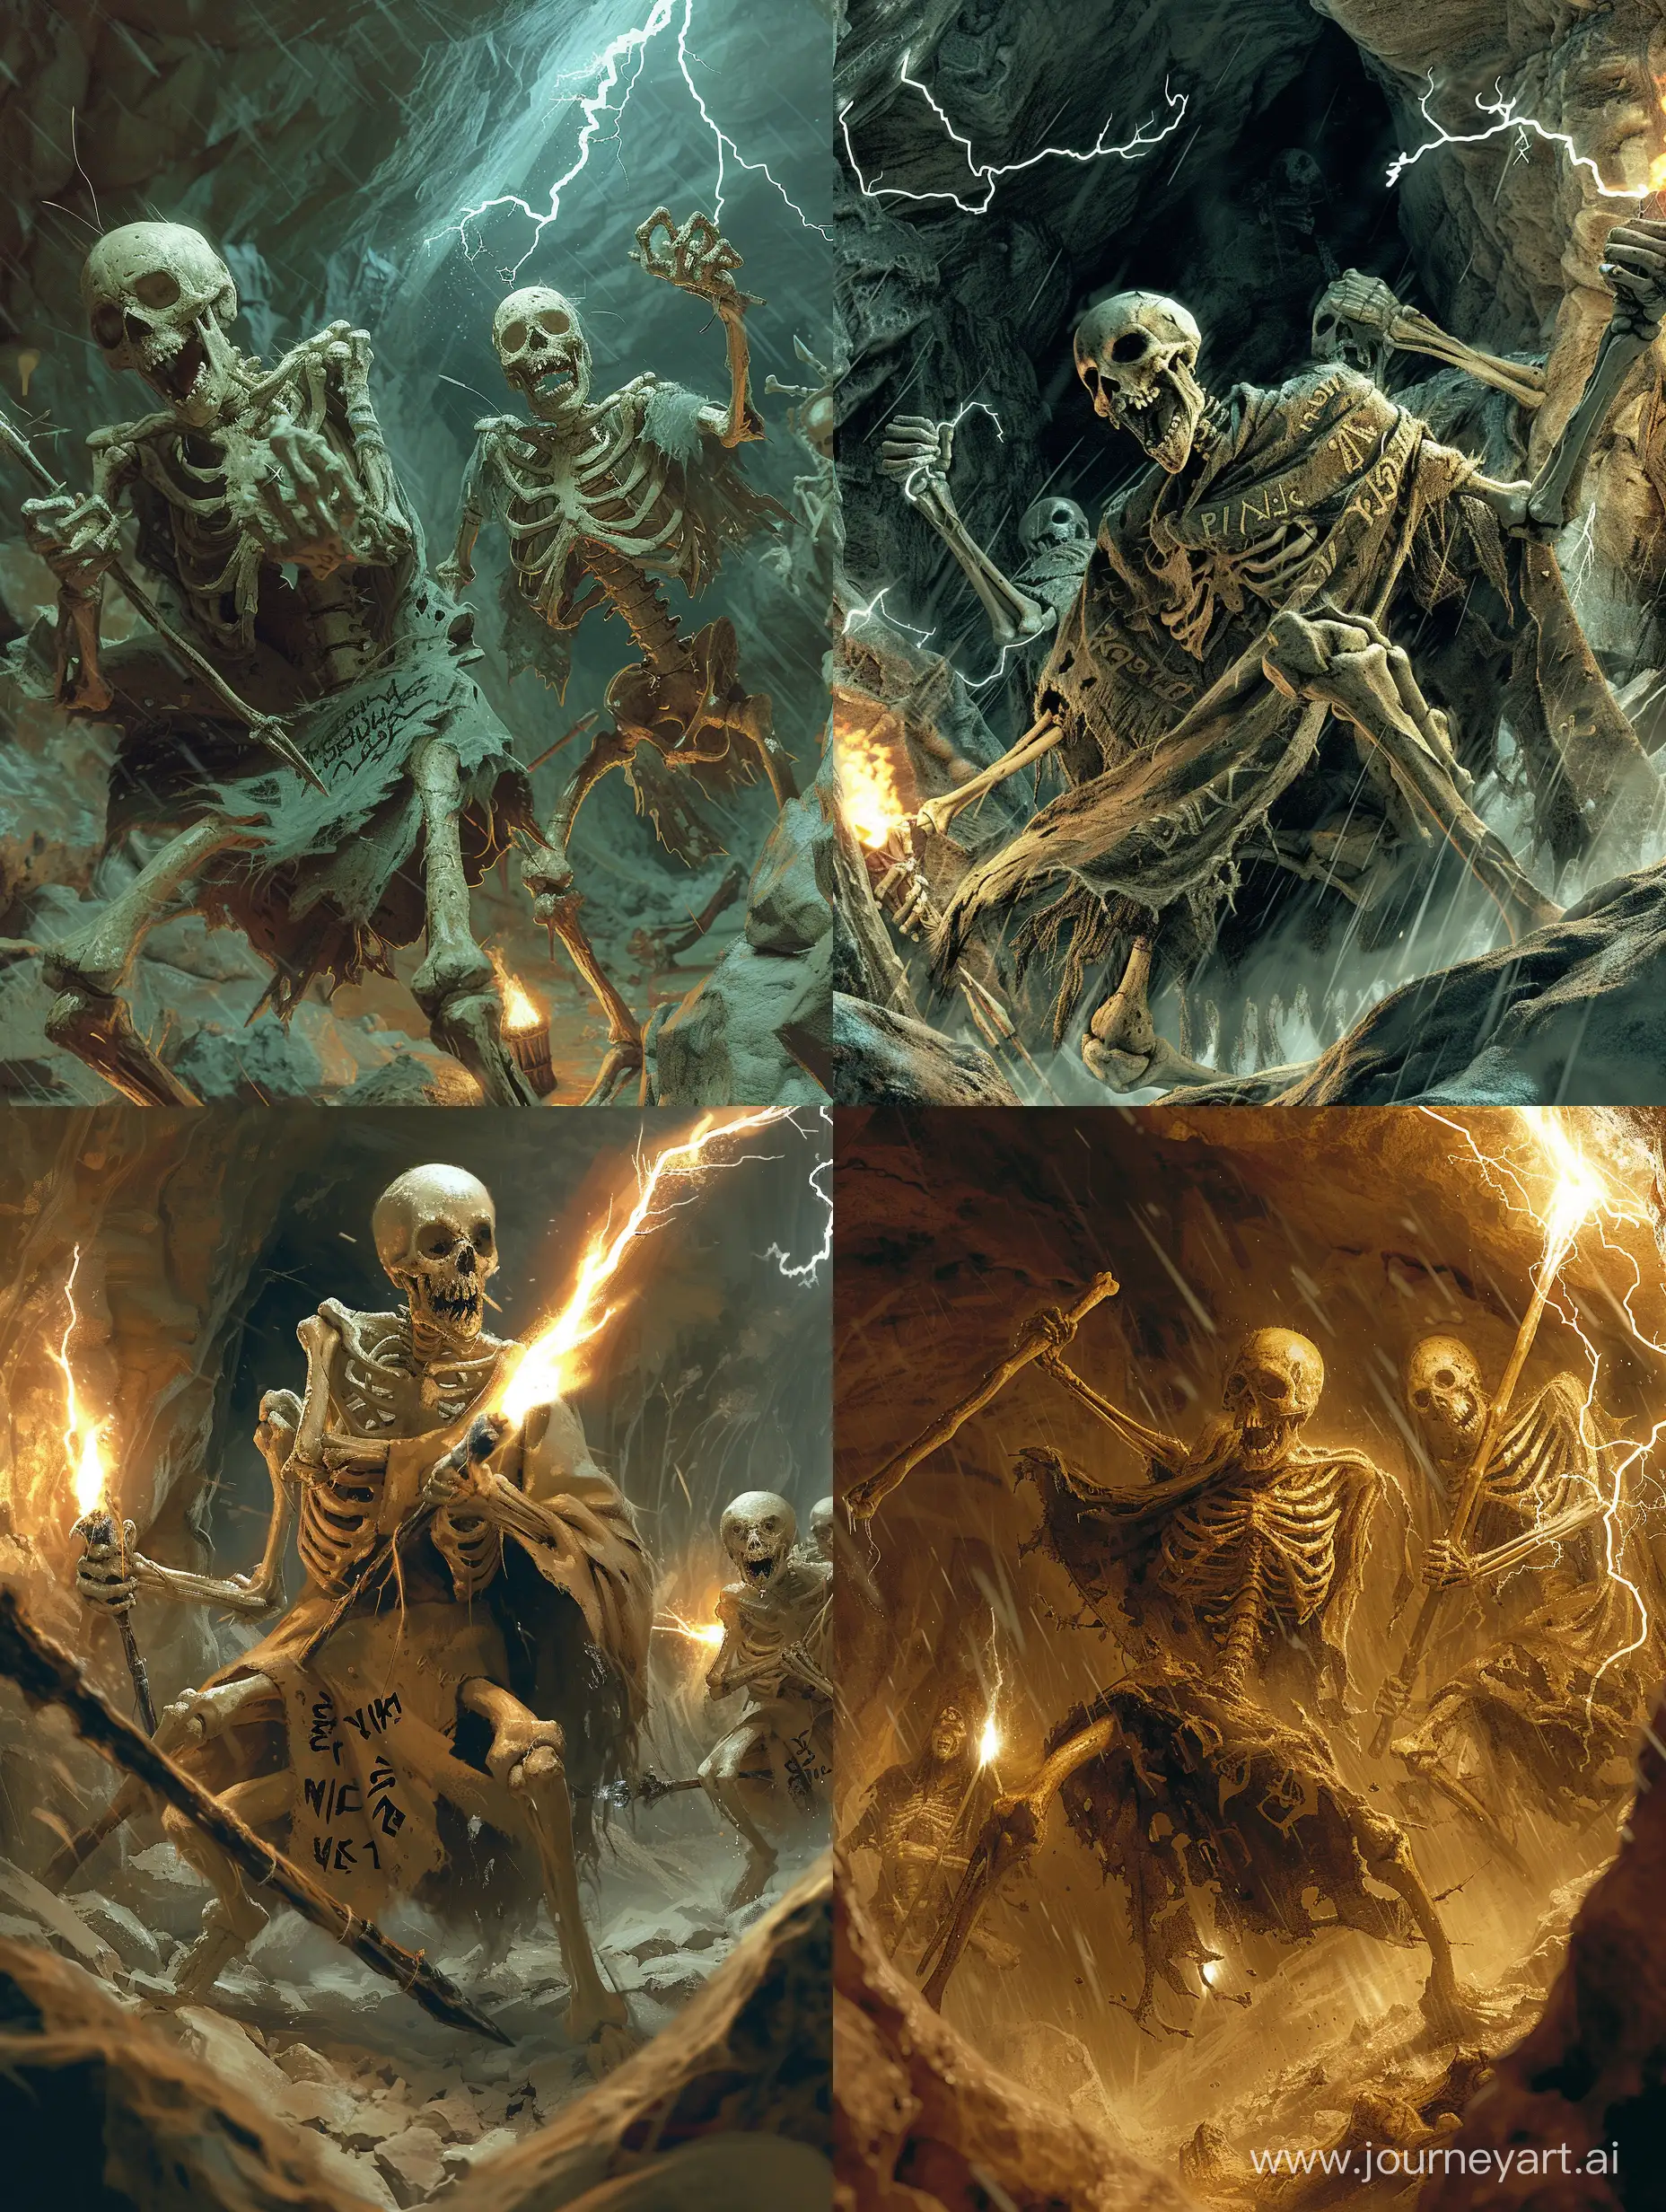 Terrifying-Living-Skeletons-with-Runic-Bone-Weapons-in-an-Underground-Cave